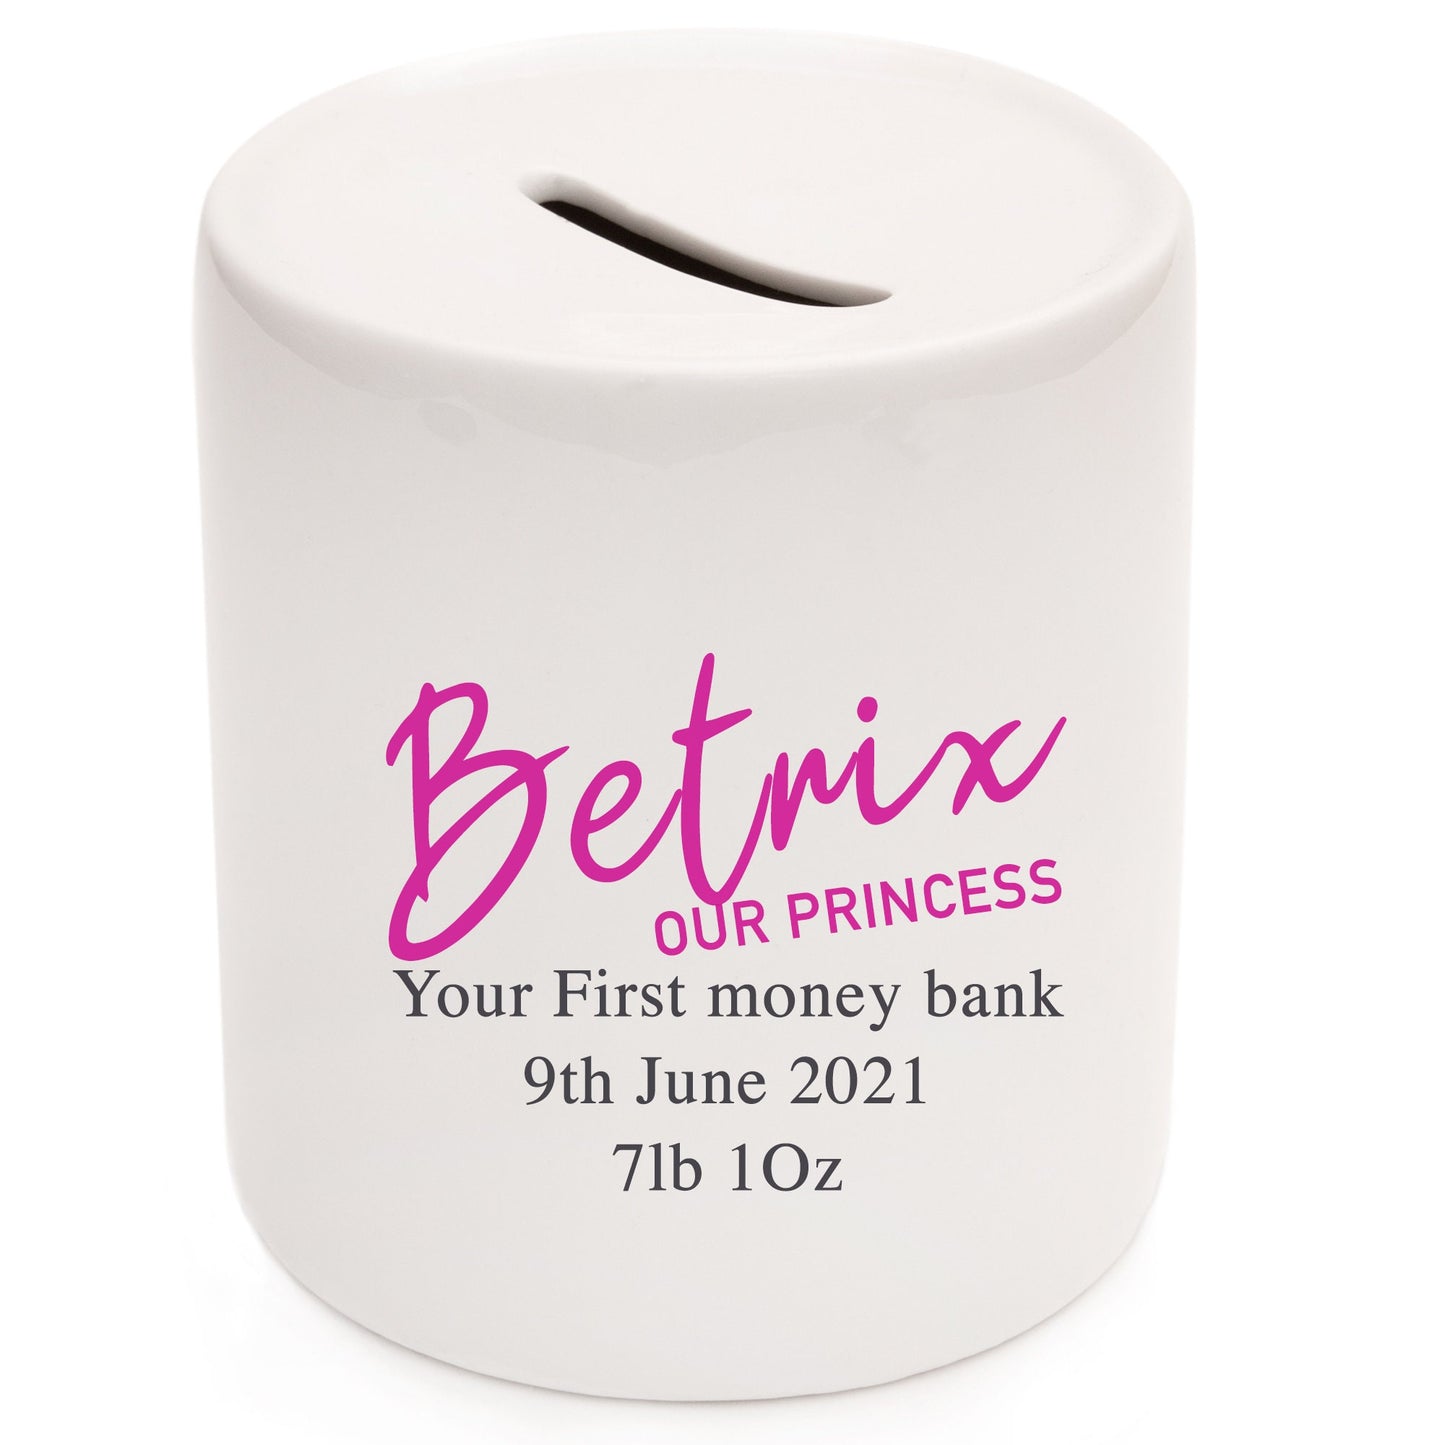 Personalised gift ceramic money box piggy bank 5x text lines example - Name, message, your text you wish to have Christmas Birthday Gifts